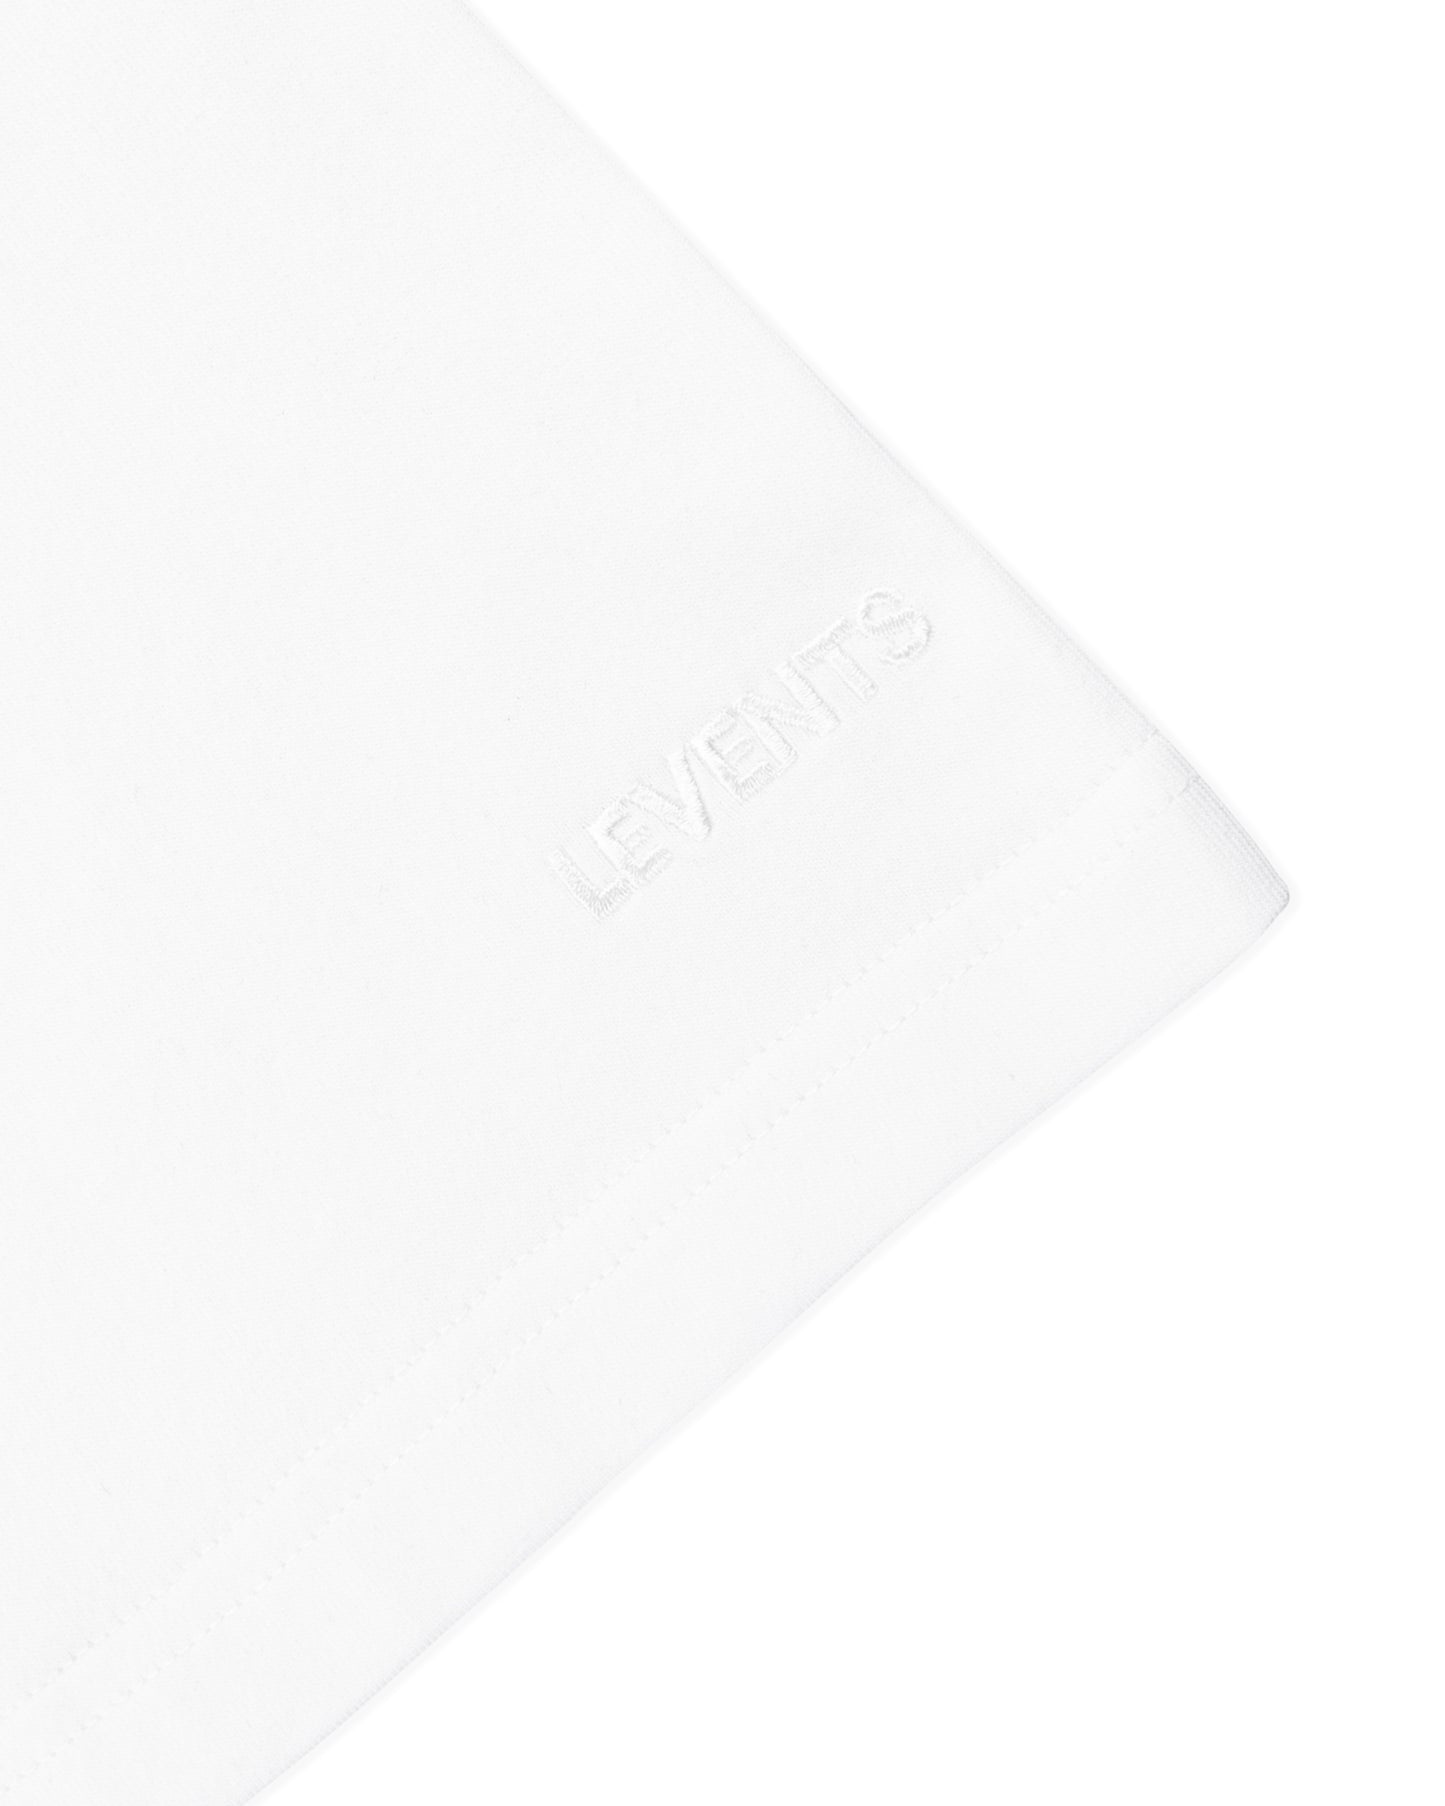 Levents® Lo Rem Tee/ White